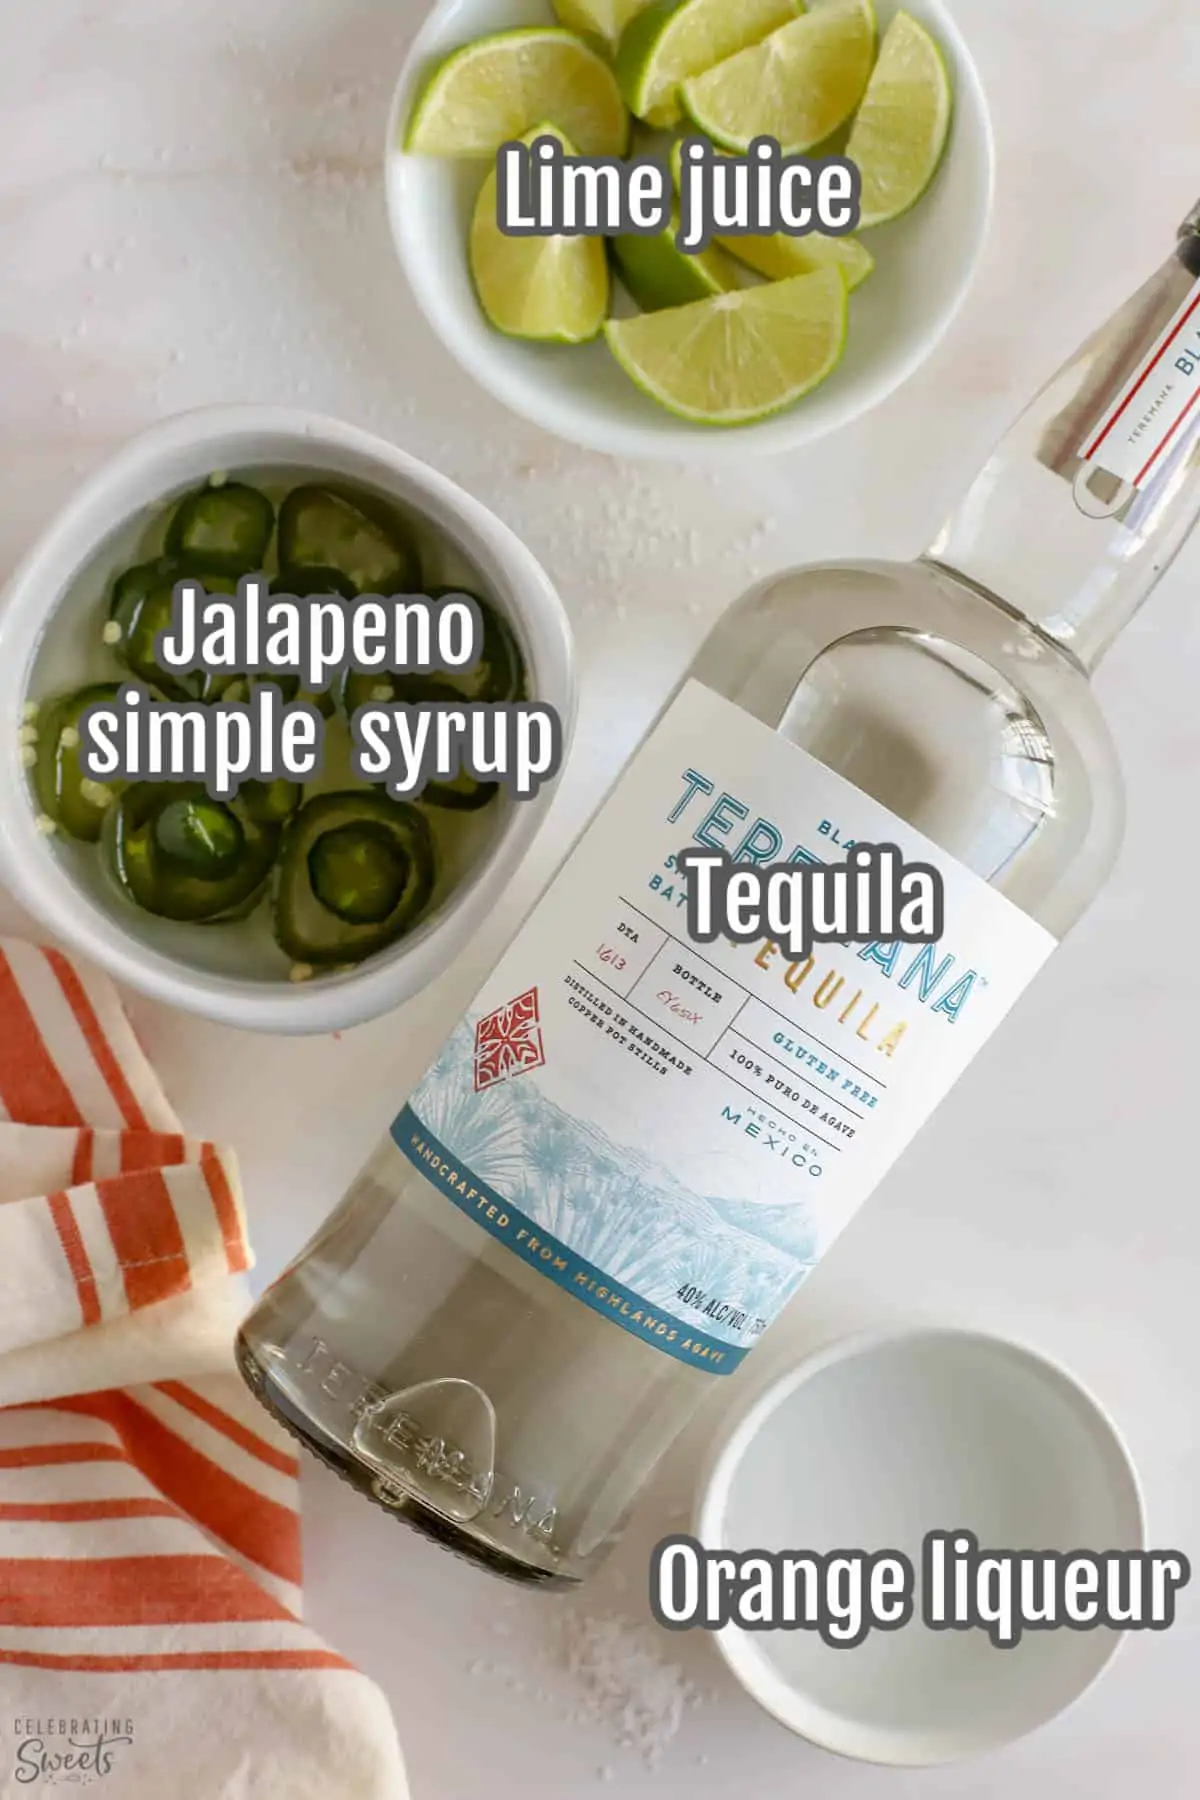 Ingredients for a spicy margarita: tequila, liqueur, limes, jalapeno syrup.